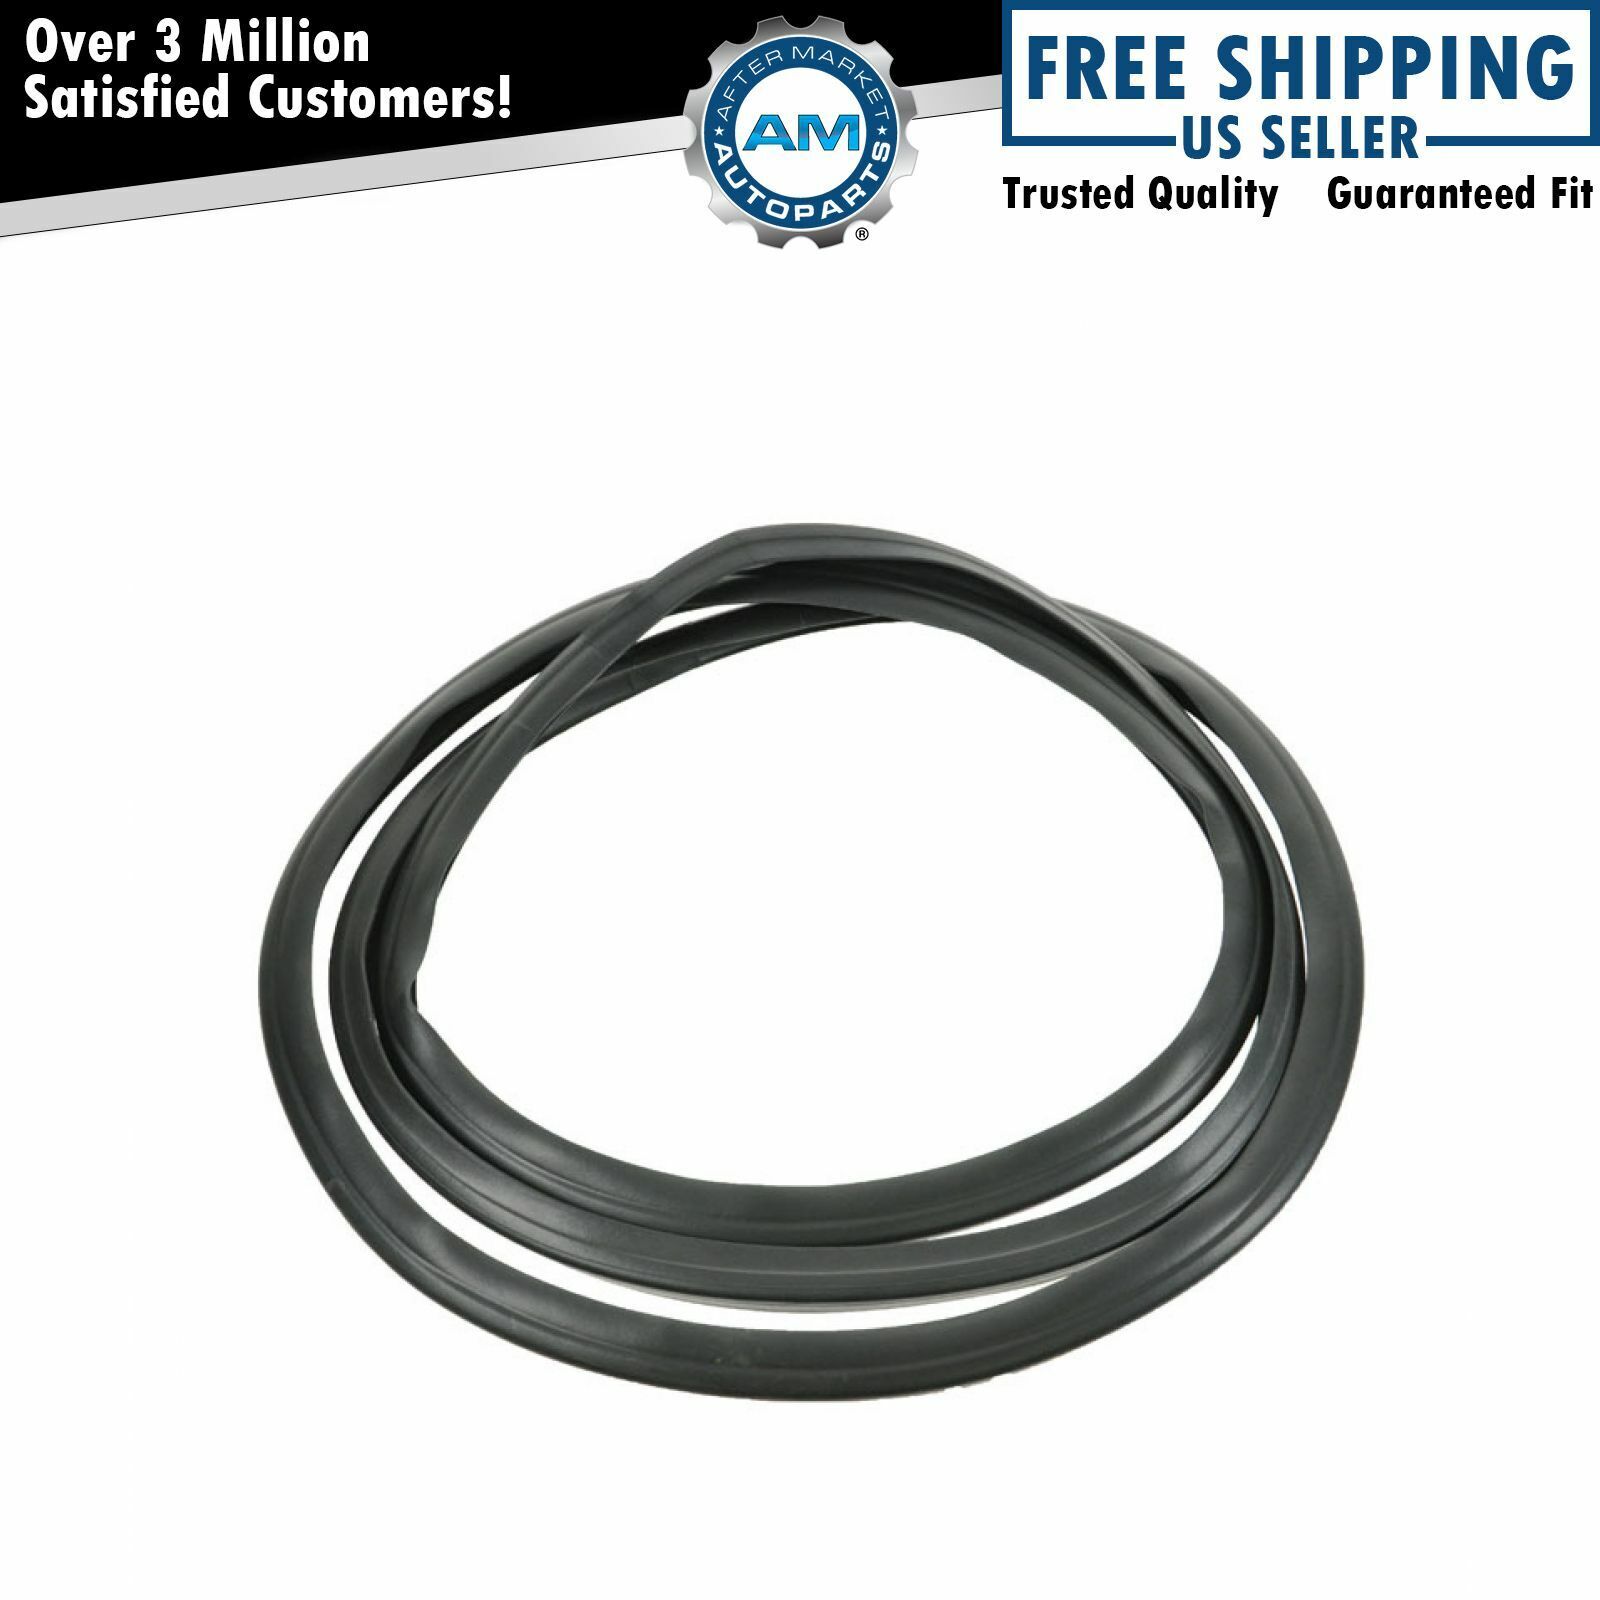 Trunk Weatherstrip Seal Rubber 1077580098 for Mercedes Benz 560 450 380 SL